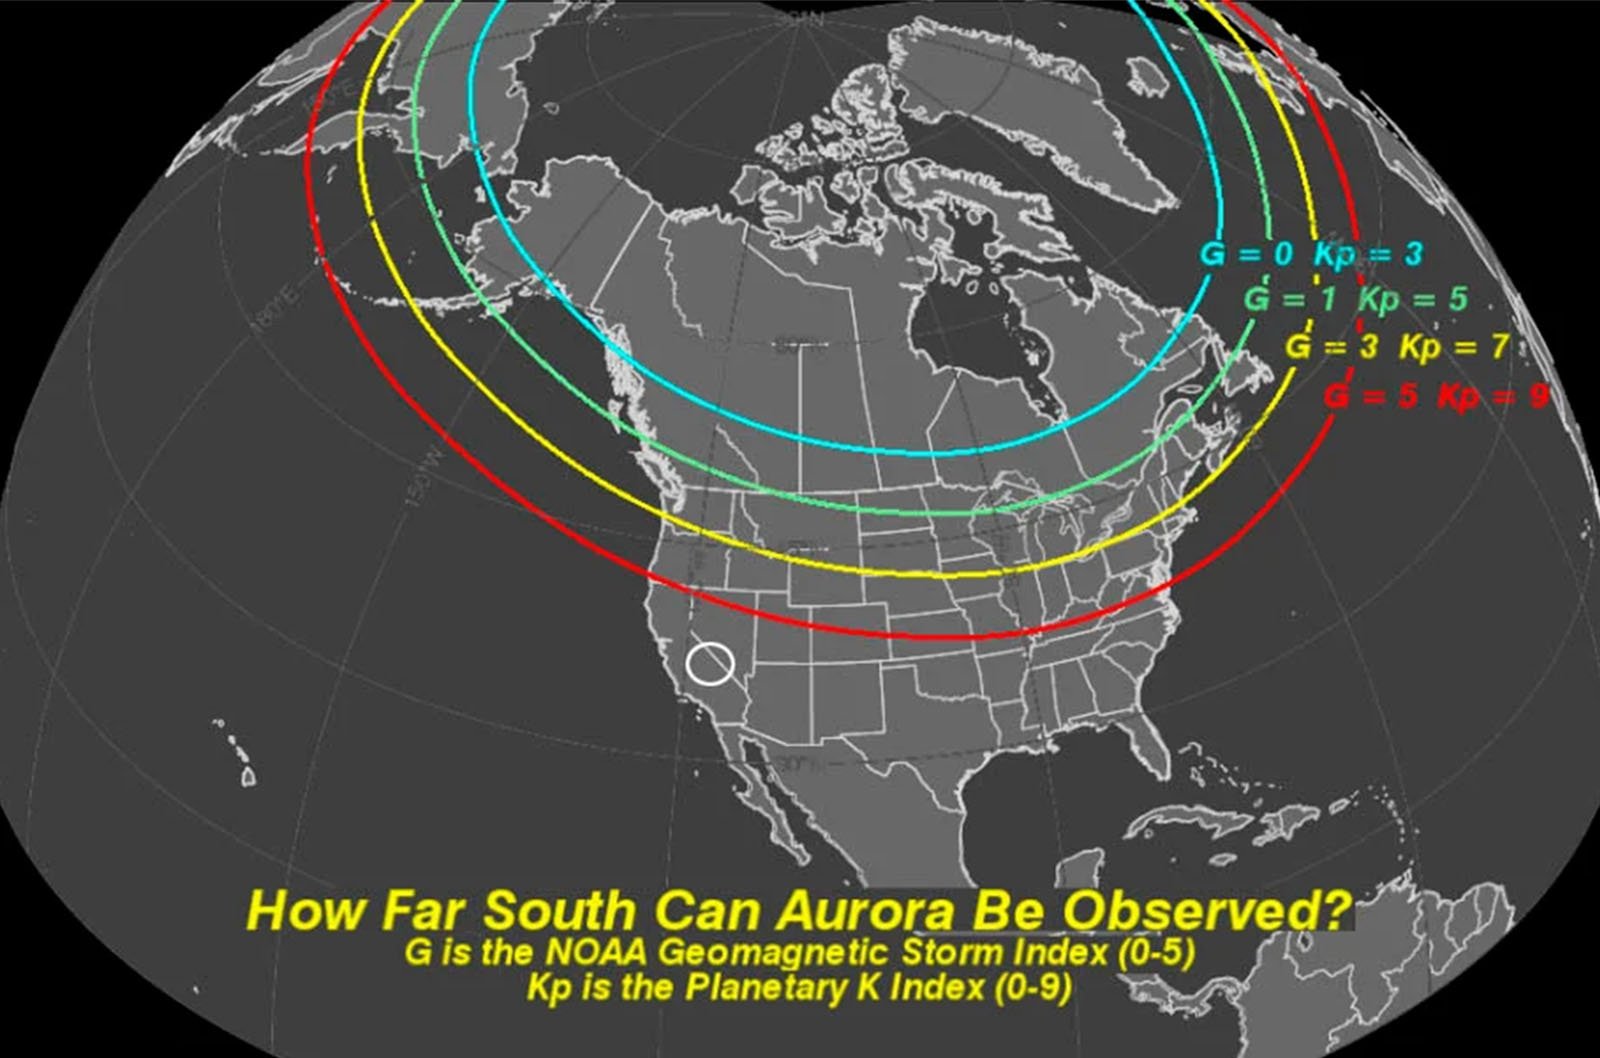 A map showing how far south the aurora can be observed based on the noaa geomagnetic storm index and the planetary k index. north america is highlighted with color-coded lines indicating different intensity levels.